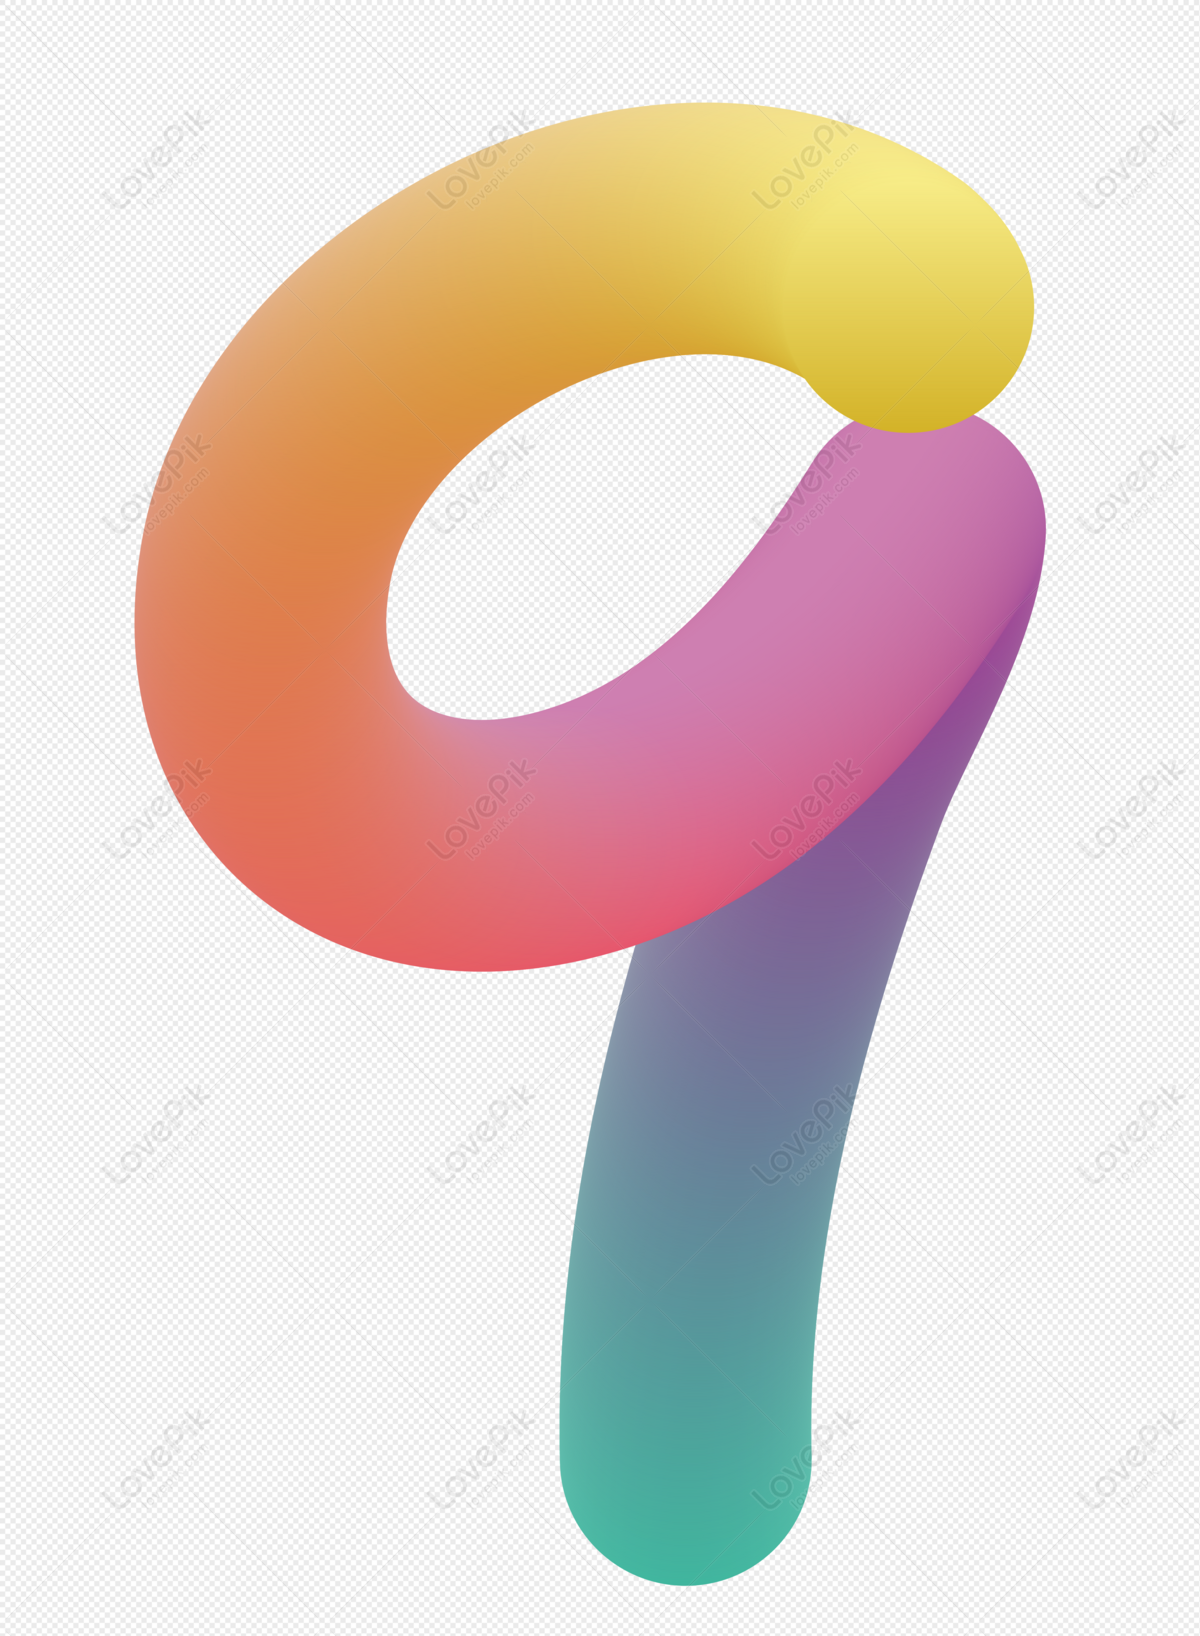 Number 9 Images, HD Pictures For Free Vectors Download - Lovepik.com